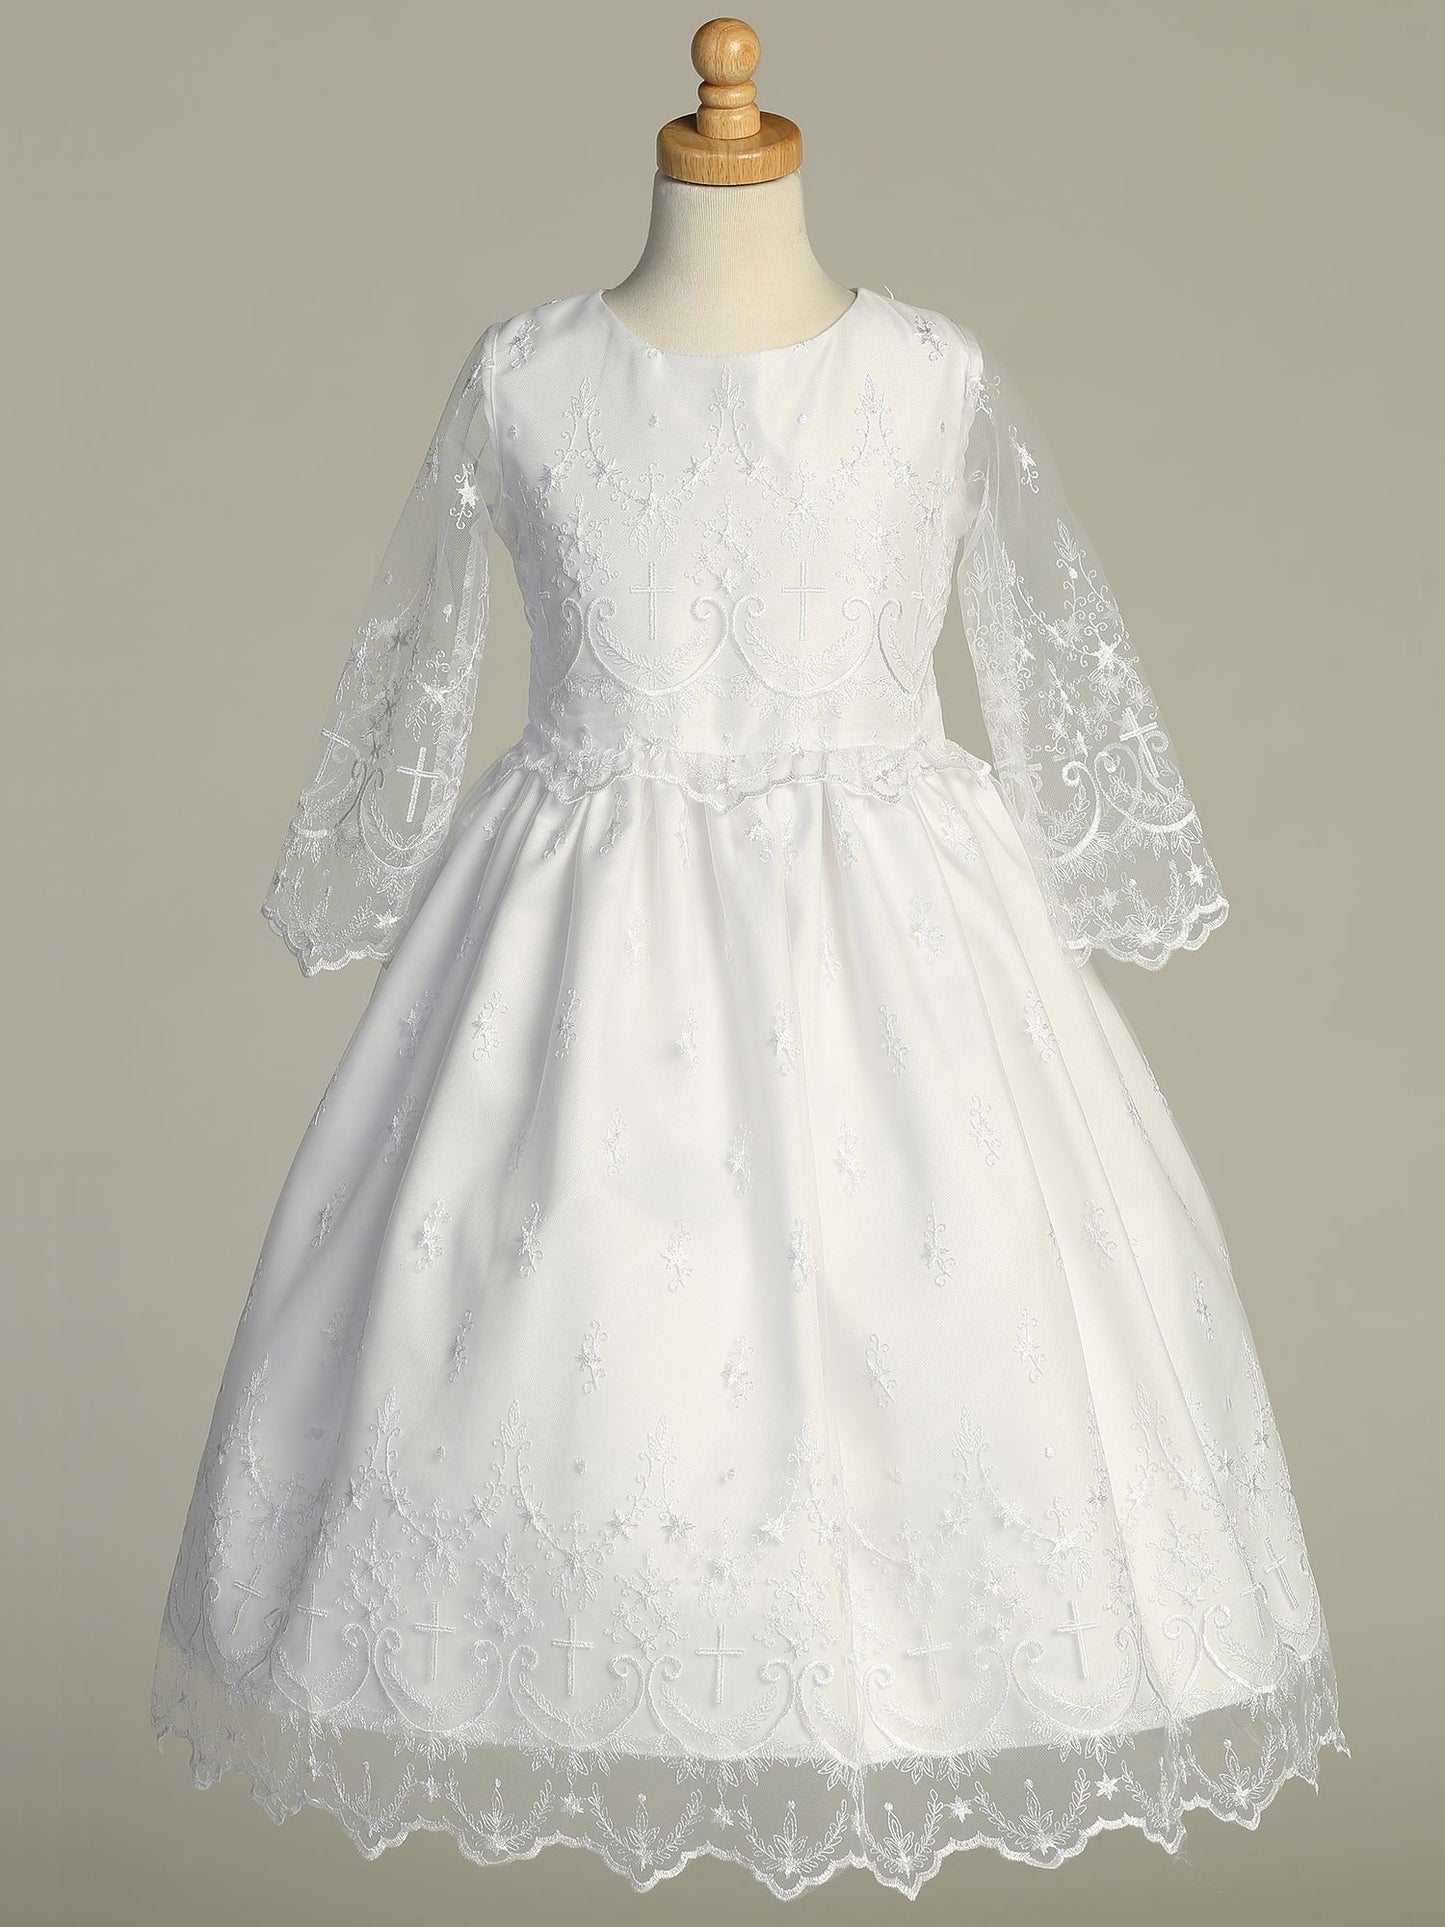 Long Sleeve First Communion Dress with Embroidered Tulle and Cross Designs - SP211